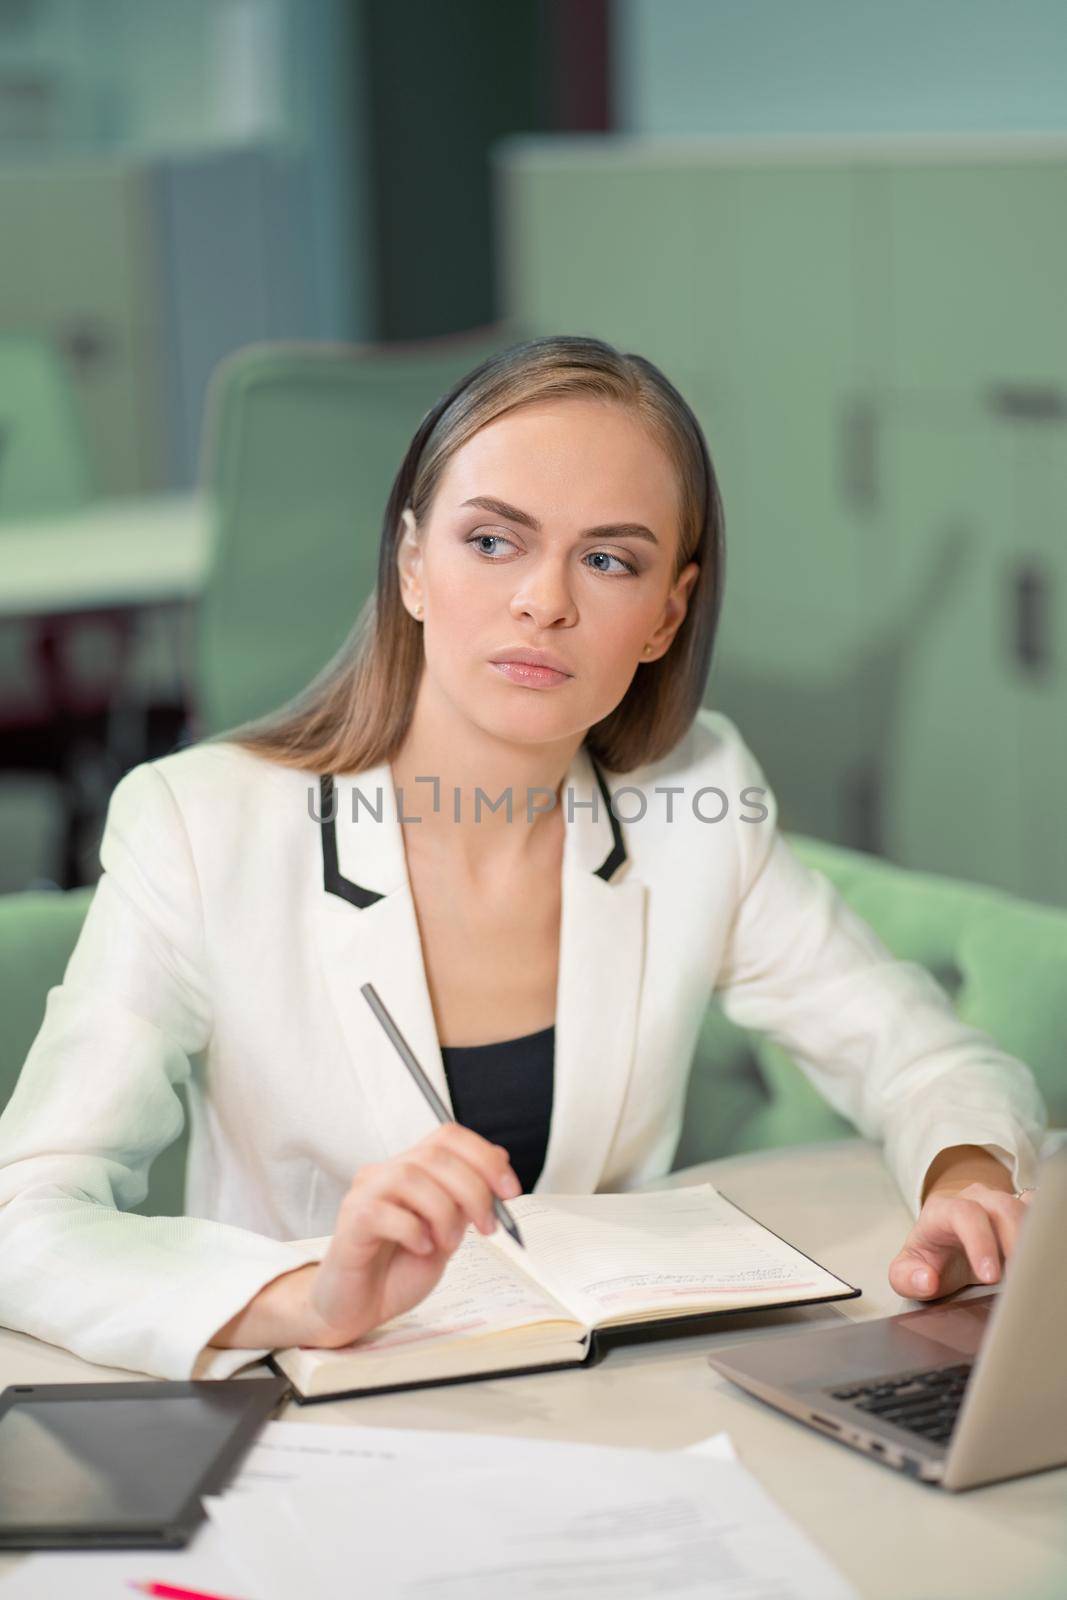 Beautiful businesswoman in white jacket making notes in her journal holding a pen her hand sitting in front of laptop. Office worker looking at her working place.